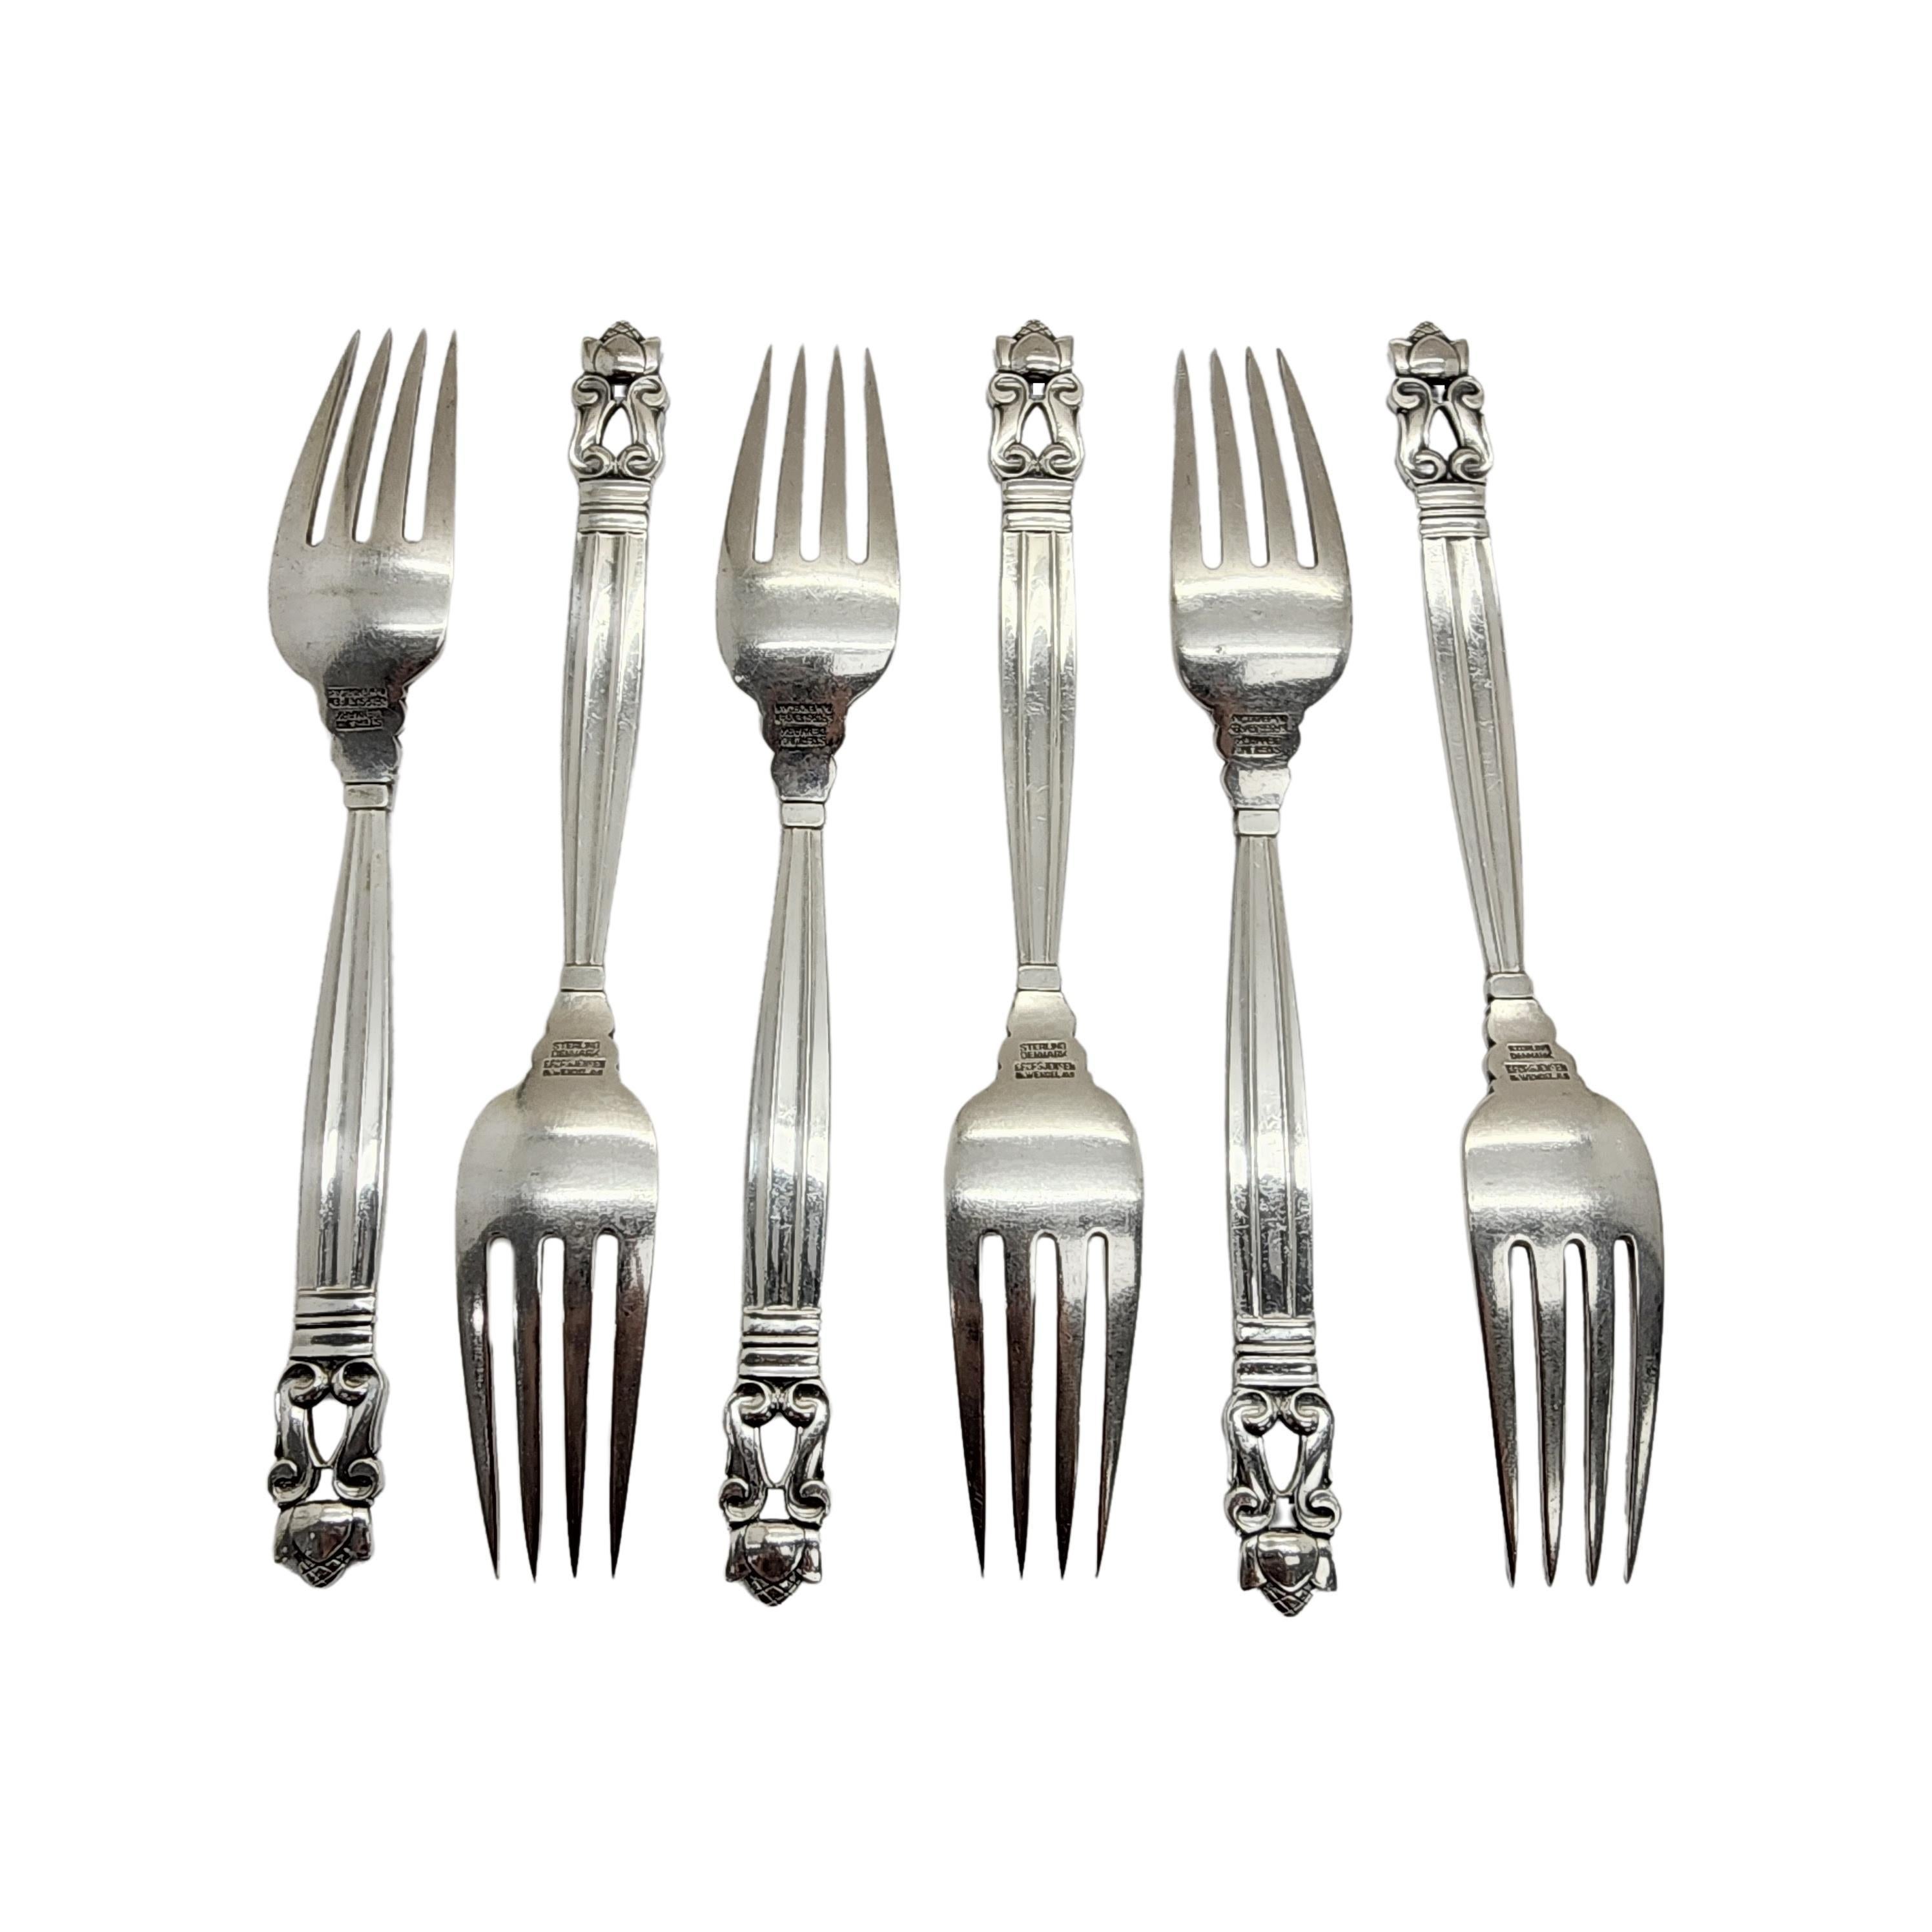 Set of 6 sterling silver forks in the Acorn pattern by Georg Jensen.

The Acorn pattern was introduced in 1915 as a collaboration between Georg Jensen and designer Johan Ronde. The Acorn pattern, which combines Art Nouveau and Art Deco styles, has